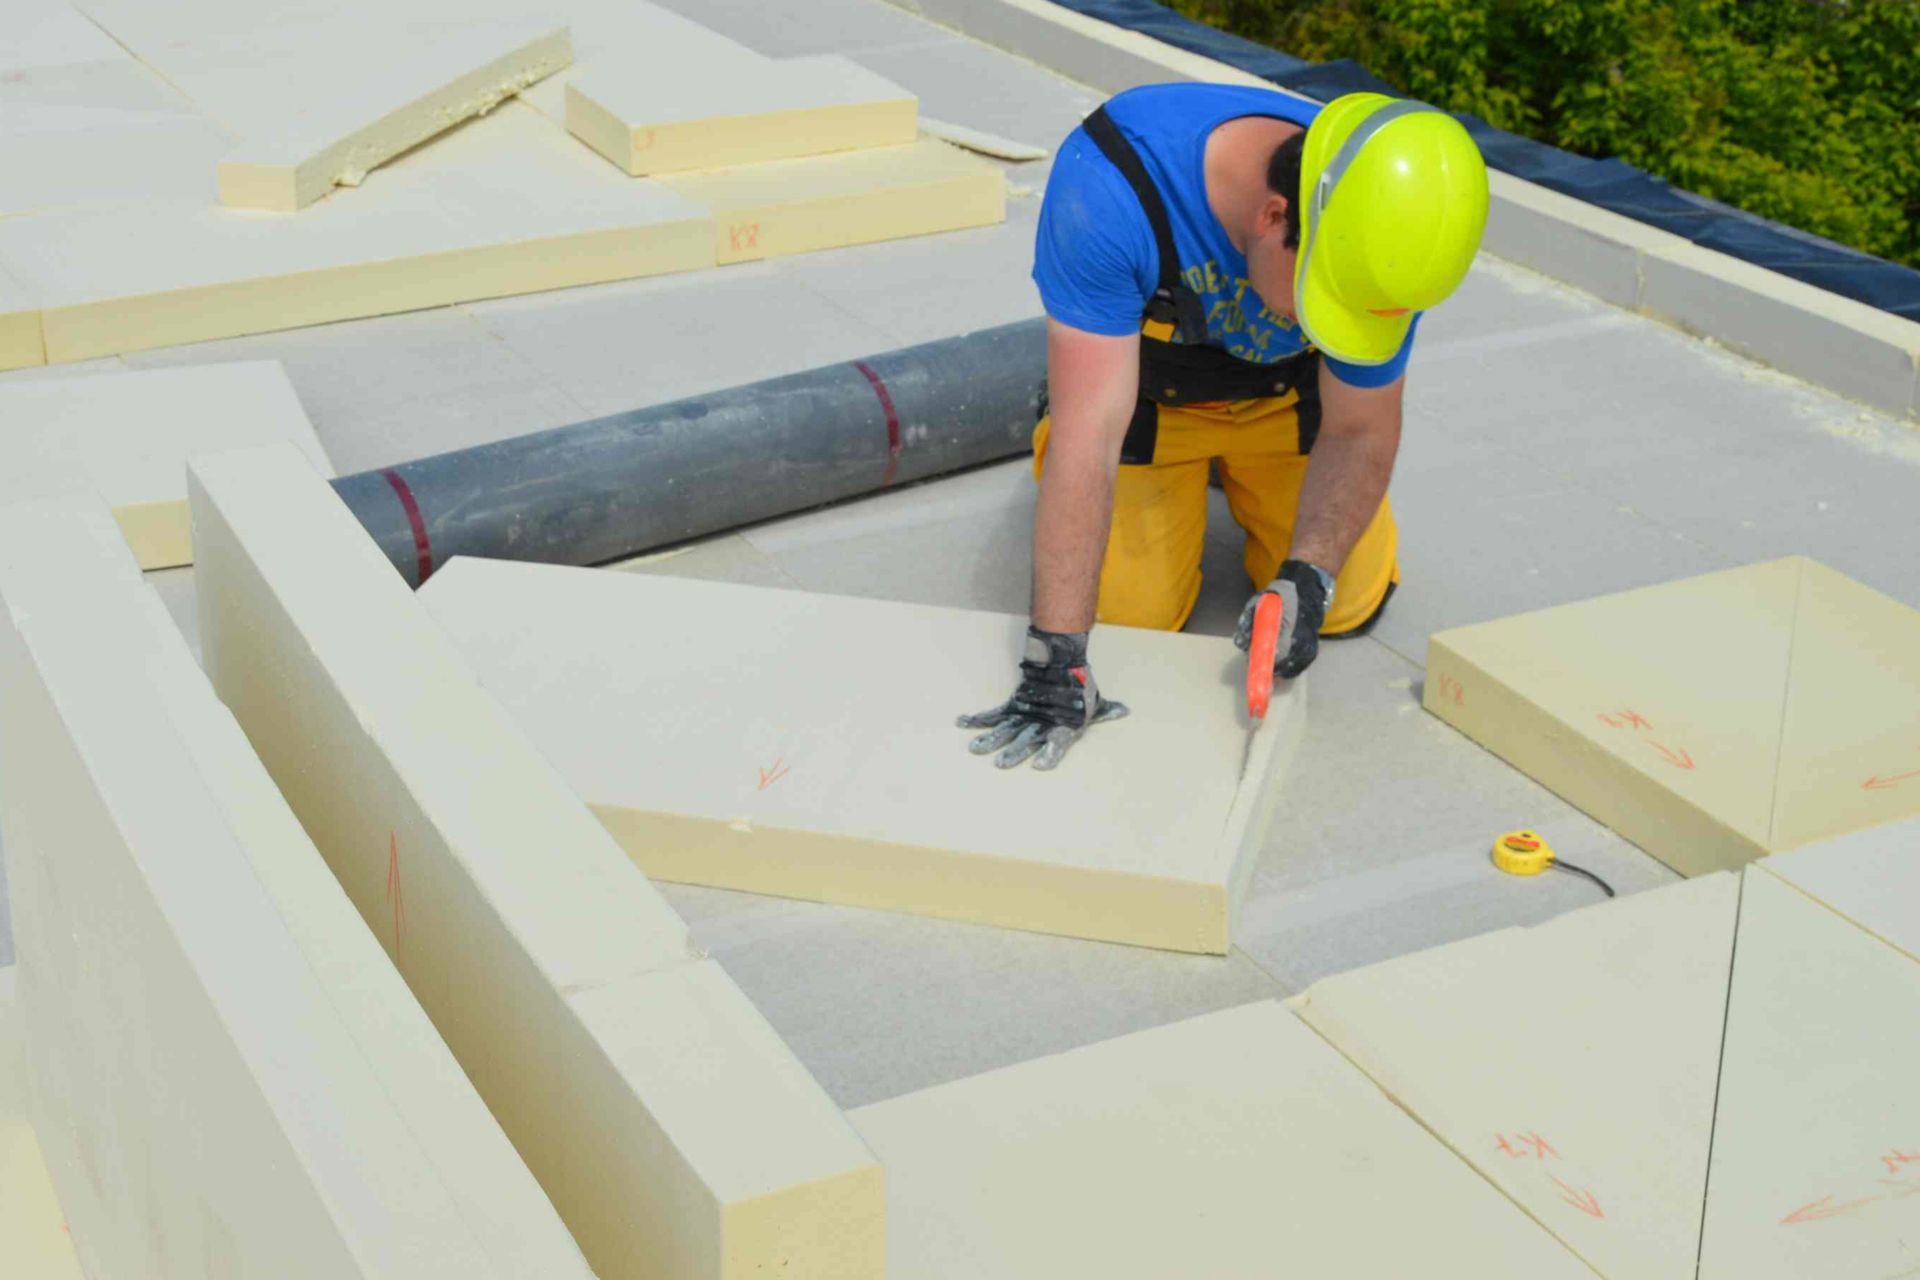 Man cutting installing thermal insulation on a roof